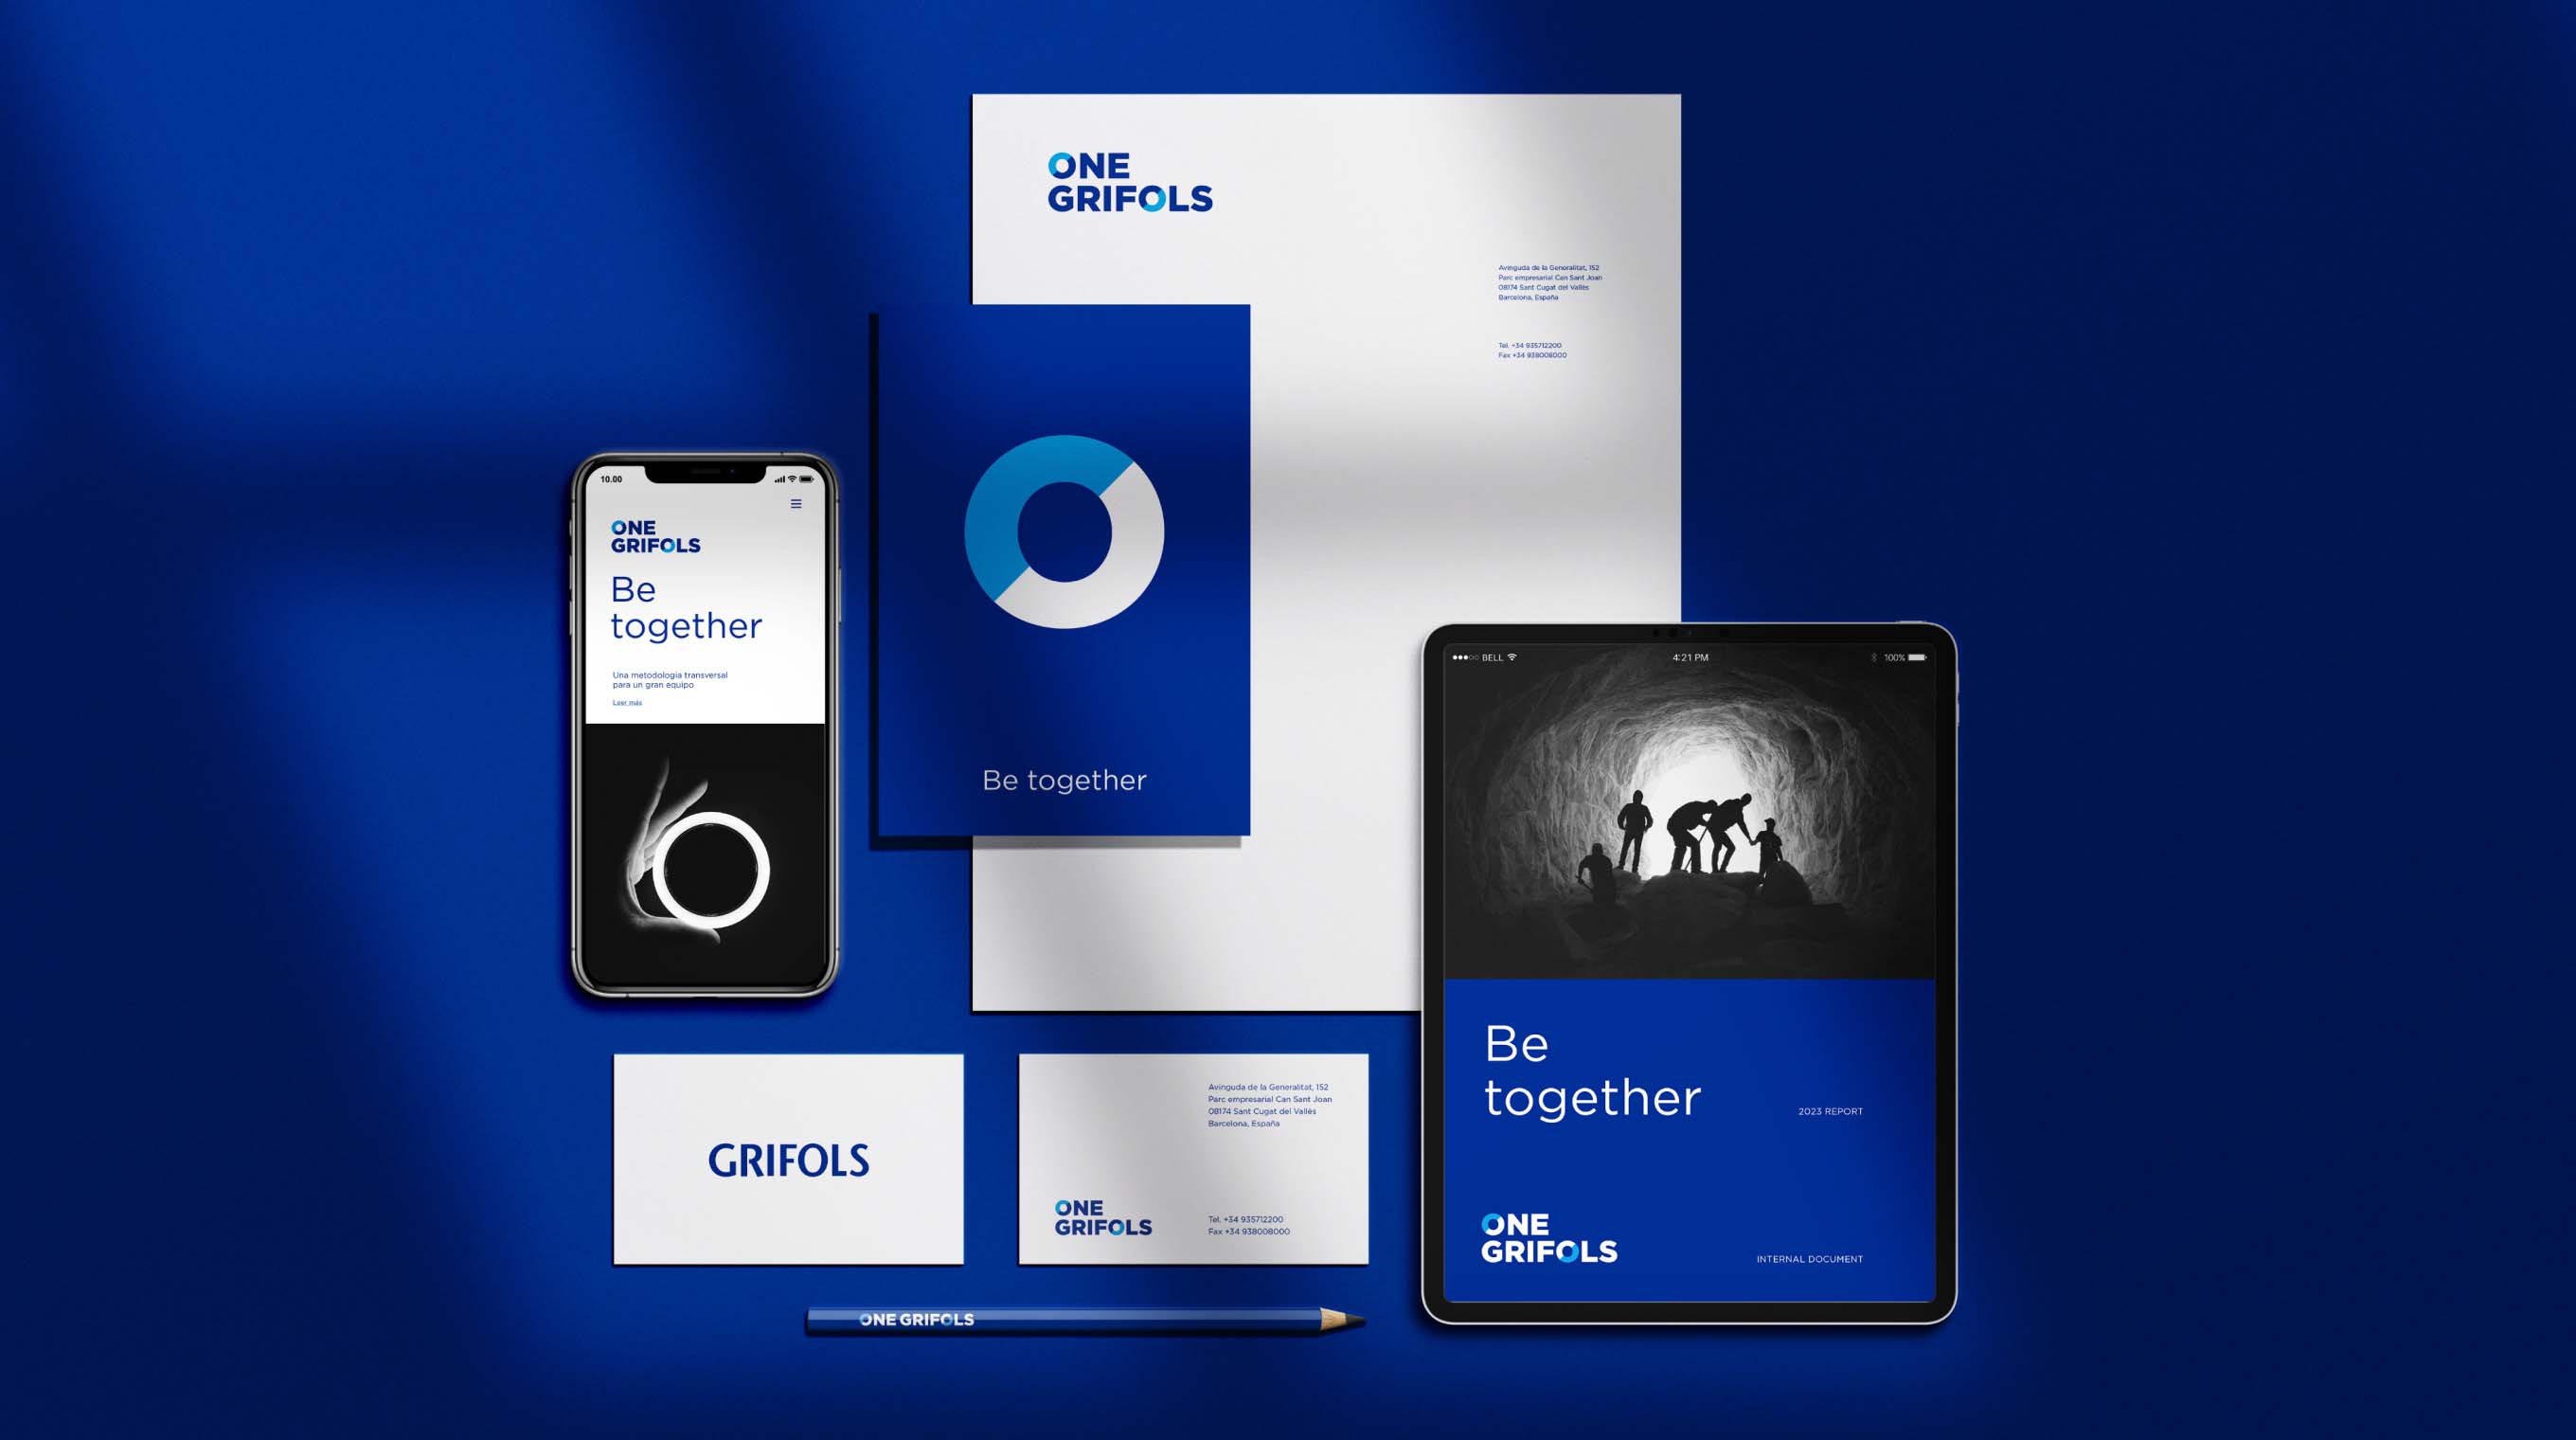 Grifols is a leading healthcare company that was founded in 1909 in Barcelona, and offers pioneering plasma-derived innovations and transfusion diagnostics solutions. Its mission is to improve the health and wellbeing of people worldwide.
